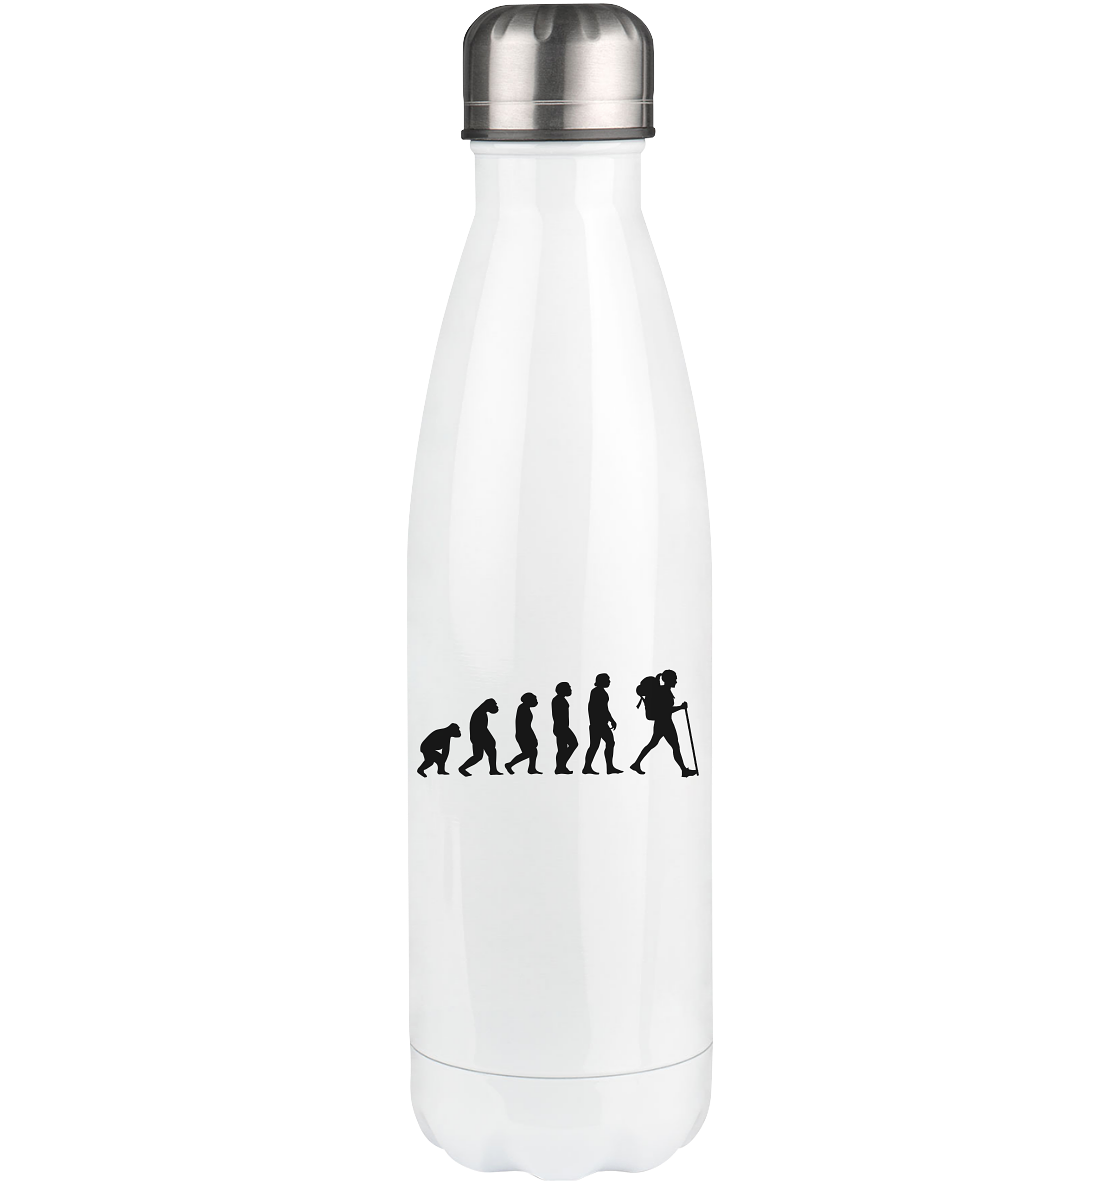 Evolution and Hiking - Edelstahl Thermosflasche wandern 500ml